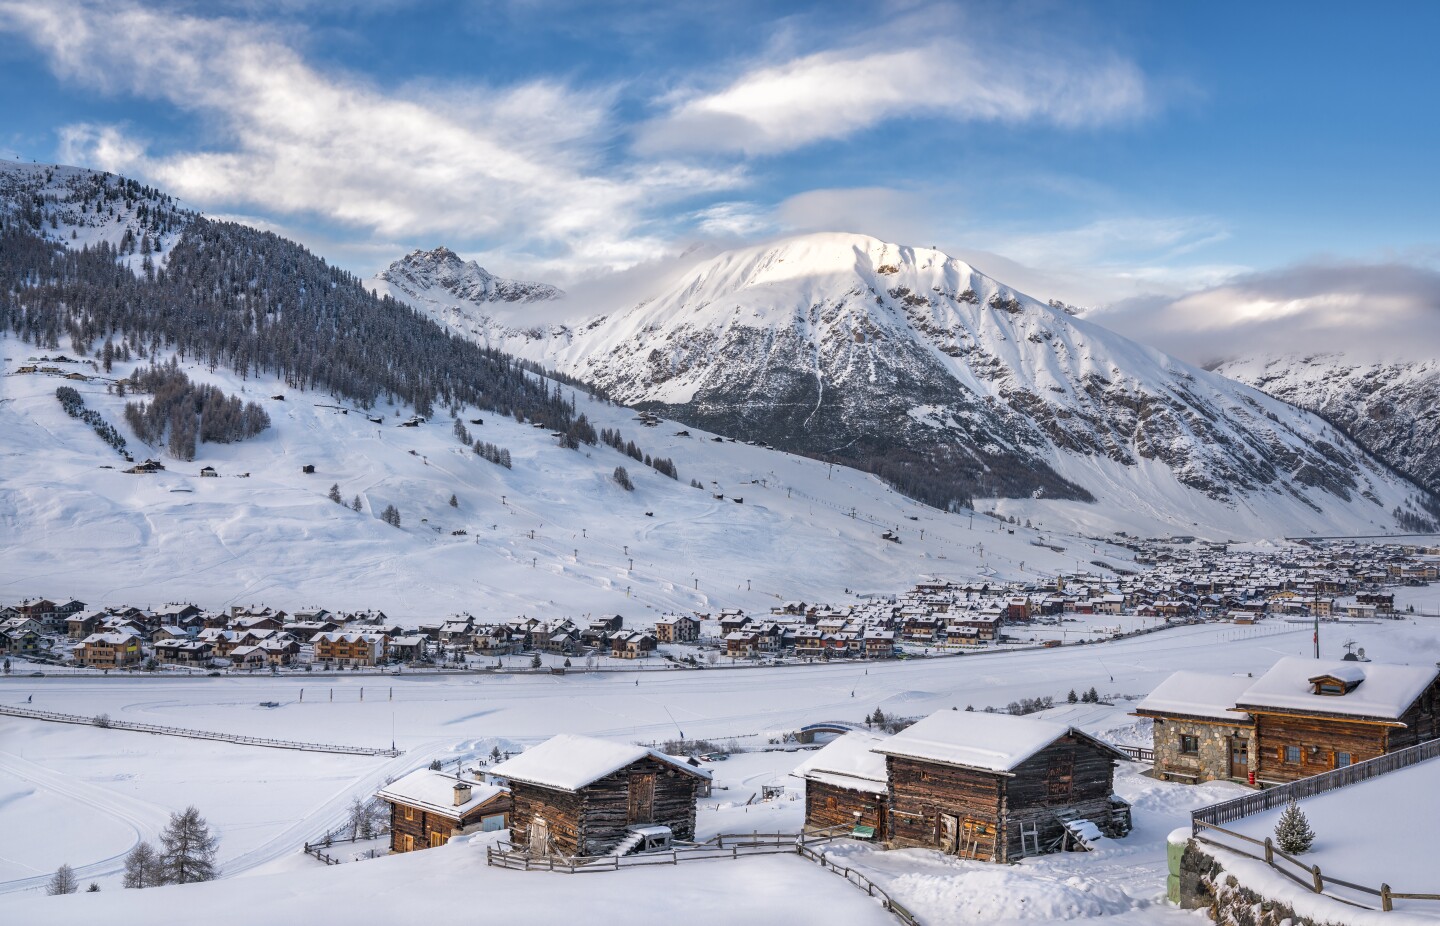 <h2>7. Livigno</h2> <ul>   <li><b>Location: </b>Livigno, Italy</li>   <li><b>Best for: </b>Unique dining and local specialties</li>   <li><b>Where to stay:</b> <a class="Link" href="https://www.hotelsonne.net/en/" rel="noopener">Eco & Wellness Boutique Hotel Sonne</a>: A boutique hotel with a quintessential ski chalet vibe, the family-run Sonne is filled with fireplaces, wood detailing, natural stone, and warm fabrics for a peaceful stay.</li>  </ul> <p>Locals call Livigno “Little Tibet” due to its high altitude, isolated location, and long, cold winters ideal for an extended ski season, but the star of this region is the required carb-heavy dishes that keep locals and skiers warm. Food in Livigno is delicious yet inexpensive, and no trip there would be complete without trying out the local specialty of <i>sciatt</i>, an addictive crispy buckwheat pancake with stringy cheese in its center. Another crowd pleaser, <i>pizzoccheri,</i> is a gut-busting dish made with a short tagliatelle pasta, cubed Casera cheese, potatoes, and cabbage with ample butter mixed in—and after ripping down over 71 miles of trails at an altitude climbing over 9,000 feet, it’s well-deserved.</p> <p>If you’re not hitting the slopes, stop by Livigno’s restaurants. Gourmands will find a variety of Michelin-starred eateries within a reasonable driving distance, including the classic <a class="Link" href="https://www.kempinski.com/en/grand-hotel-des-bains/restaurants-bars/ca-d-oro" rel="noopener">French Cà d’Oro restaurant</a>, Brazilian cuisine from Vivanda, Mediterranean at <a class="Link" href="https://www.talvo.ch/en/" rel="noopener">Talvo by Dalsass</a>, and creative dishes at <a class="Link" href="https://giardinohotels.ch/en/st-moritz/restaurants/restaurant-ecco-stmoritz/" rel="noopener">Ecco St. Moritz</a>.</p>